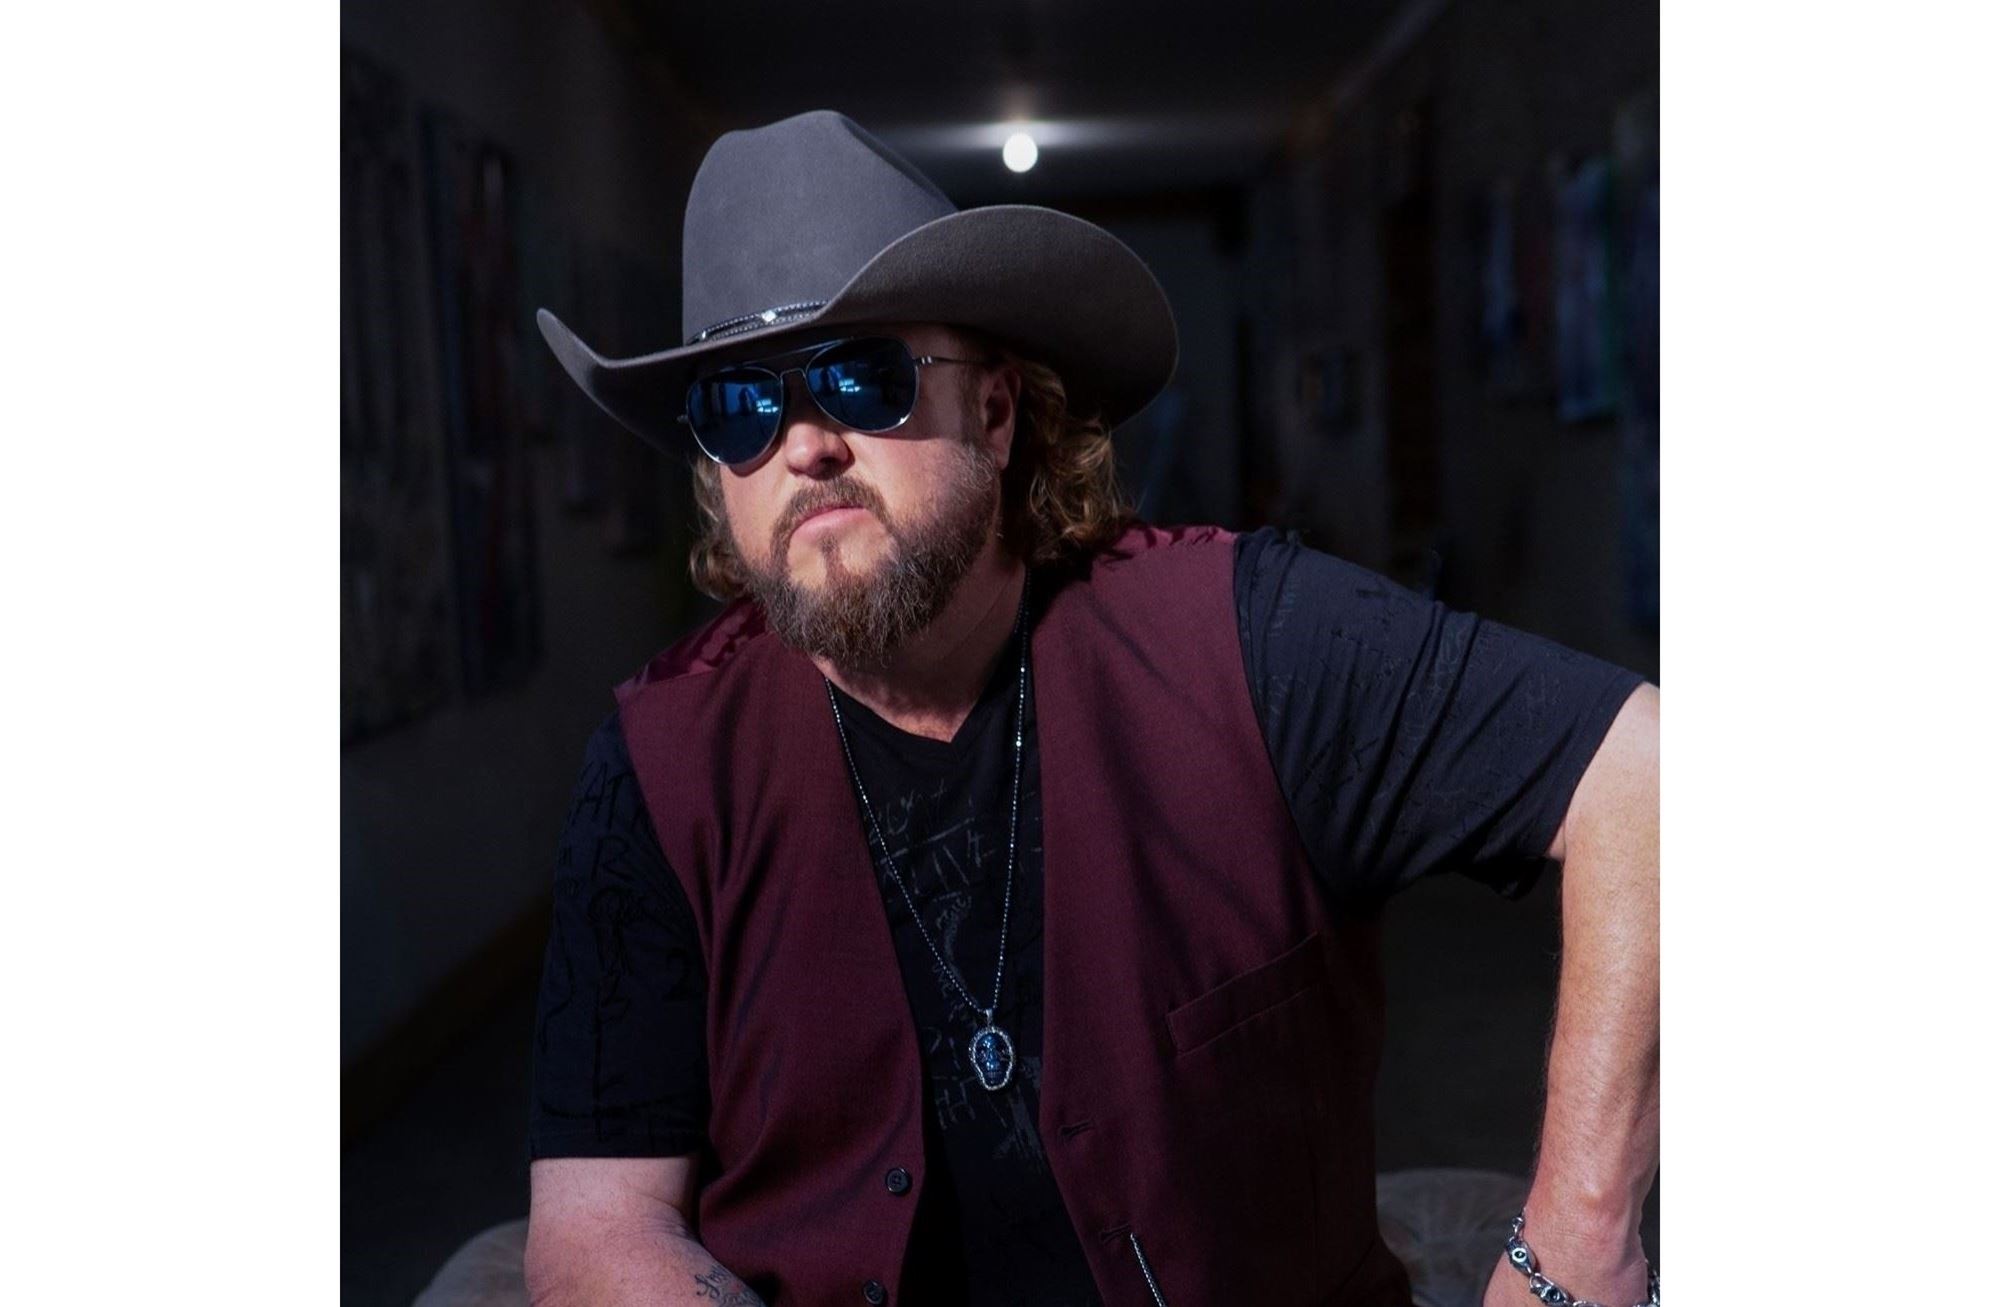 Photo: Colt Ford wearing cowboy hat and sunglasses